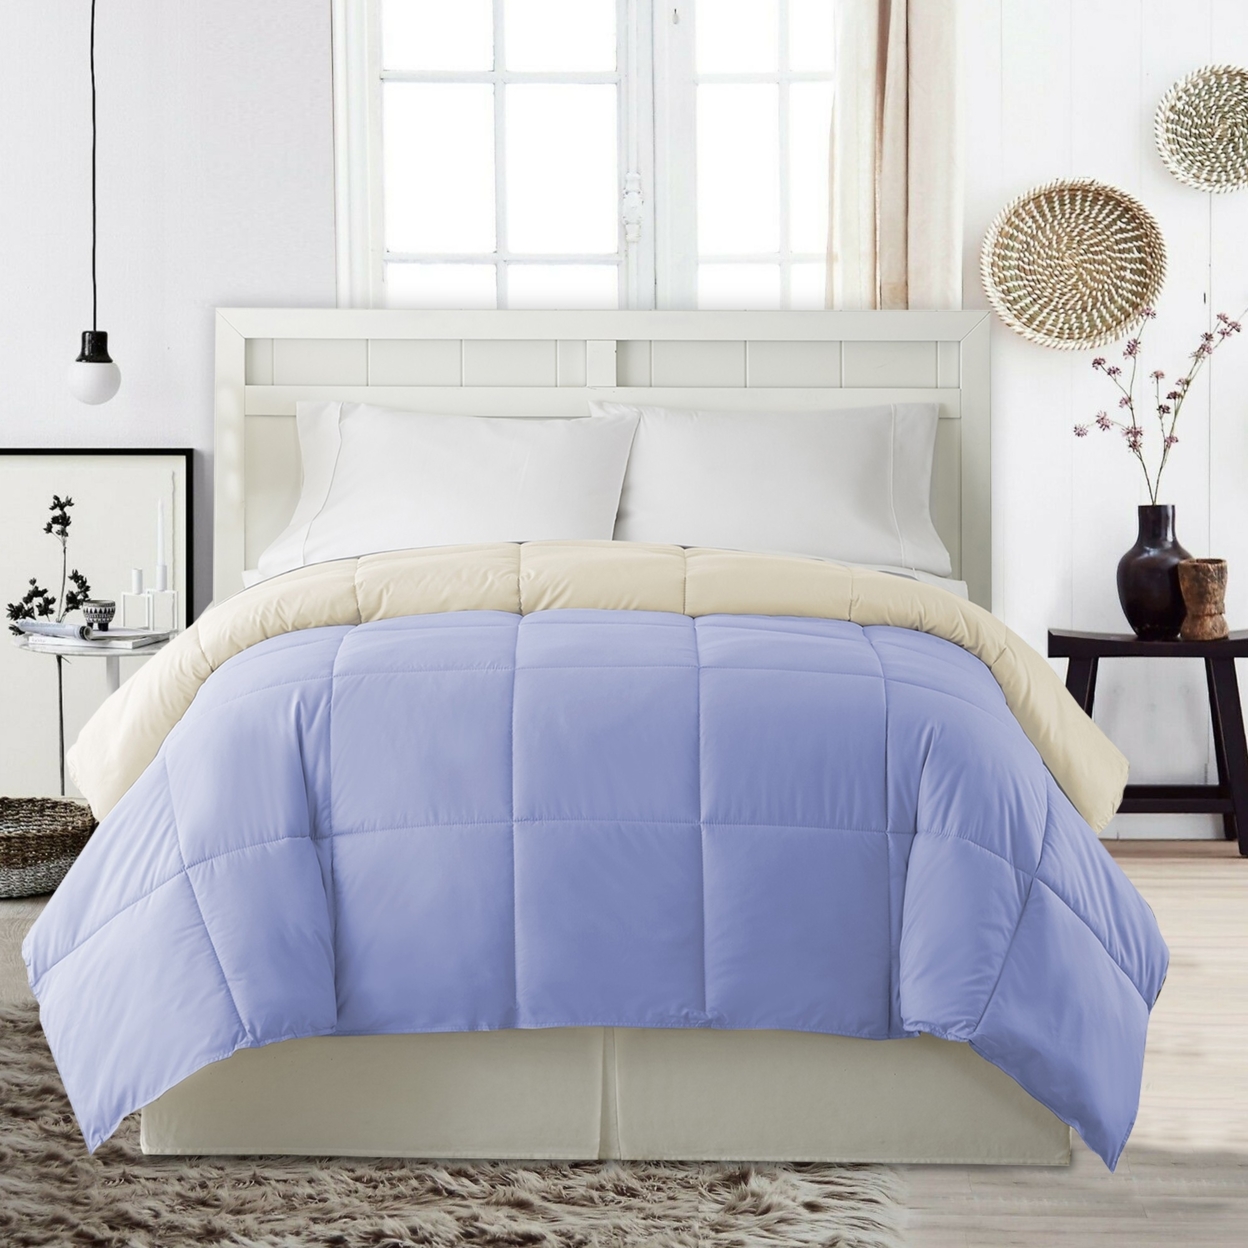 Genoa King Size Box Quilted Reversible Comforter The Urban Port, Blue And Cream- Saltoro Sherpi